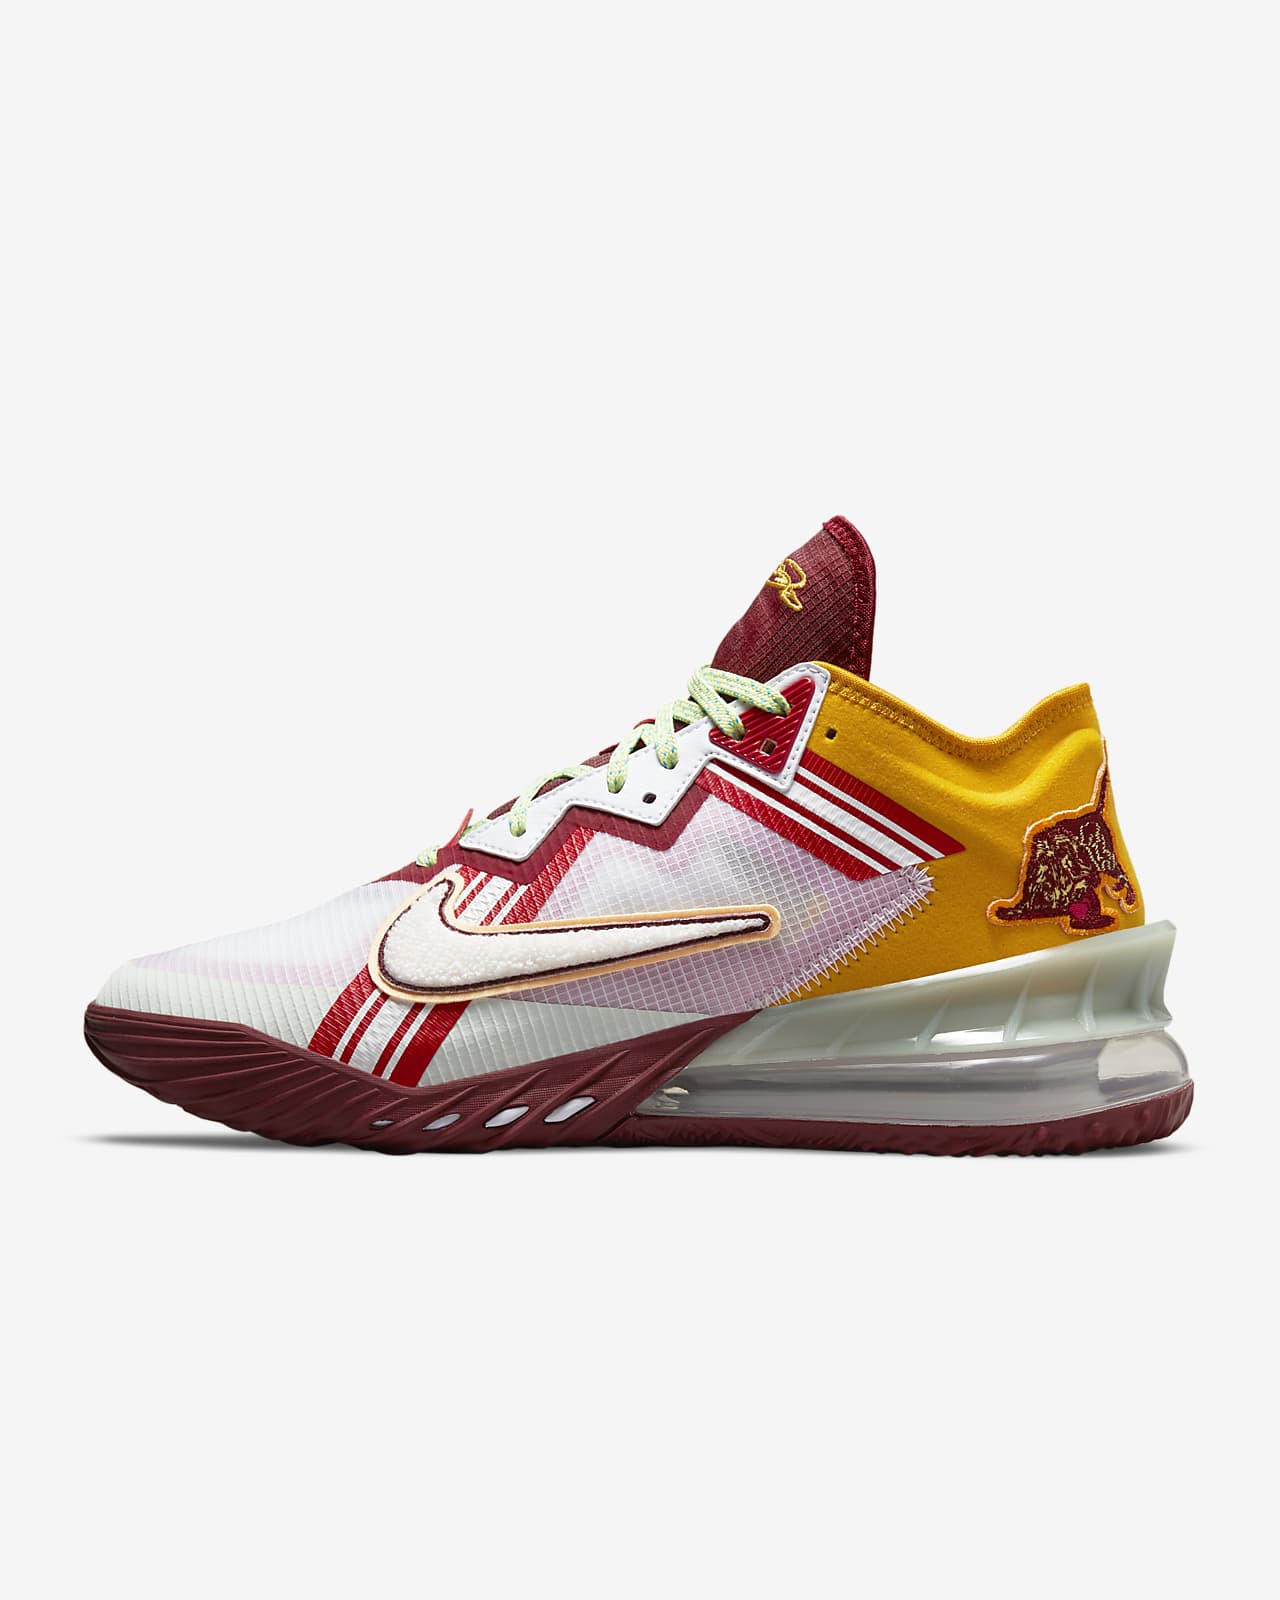 Chaussure de basketball LeBron 18 Low x Mimi Plange « Higher Learning »